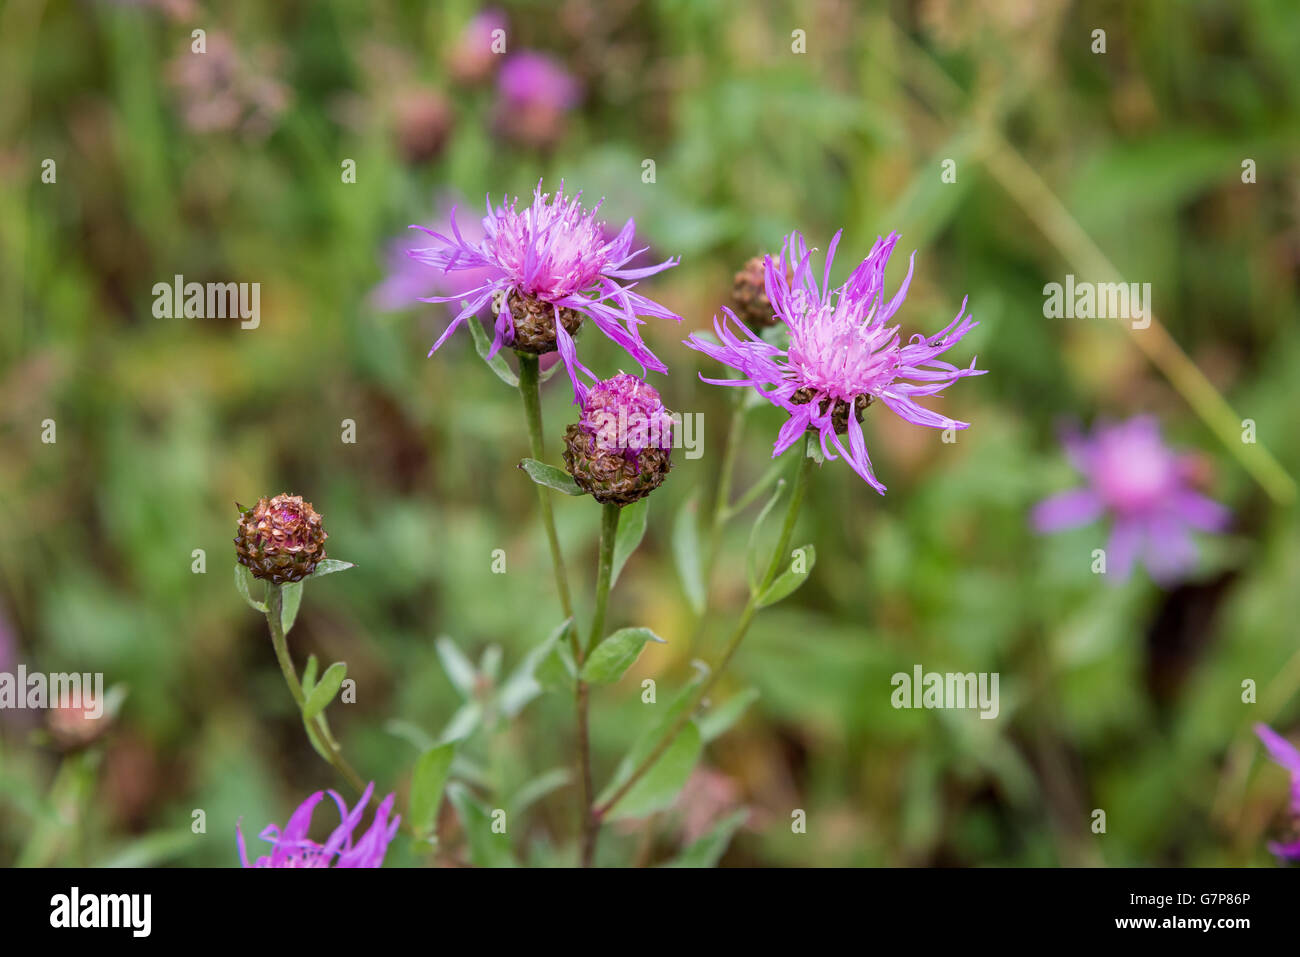 Violet flower of wild thistle (carduus) with blurred background Stock Photo